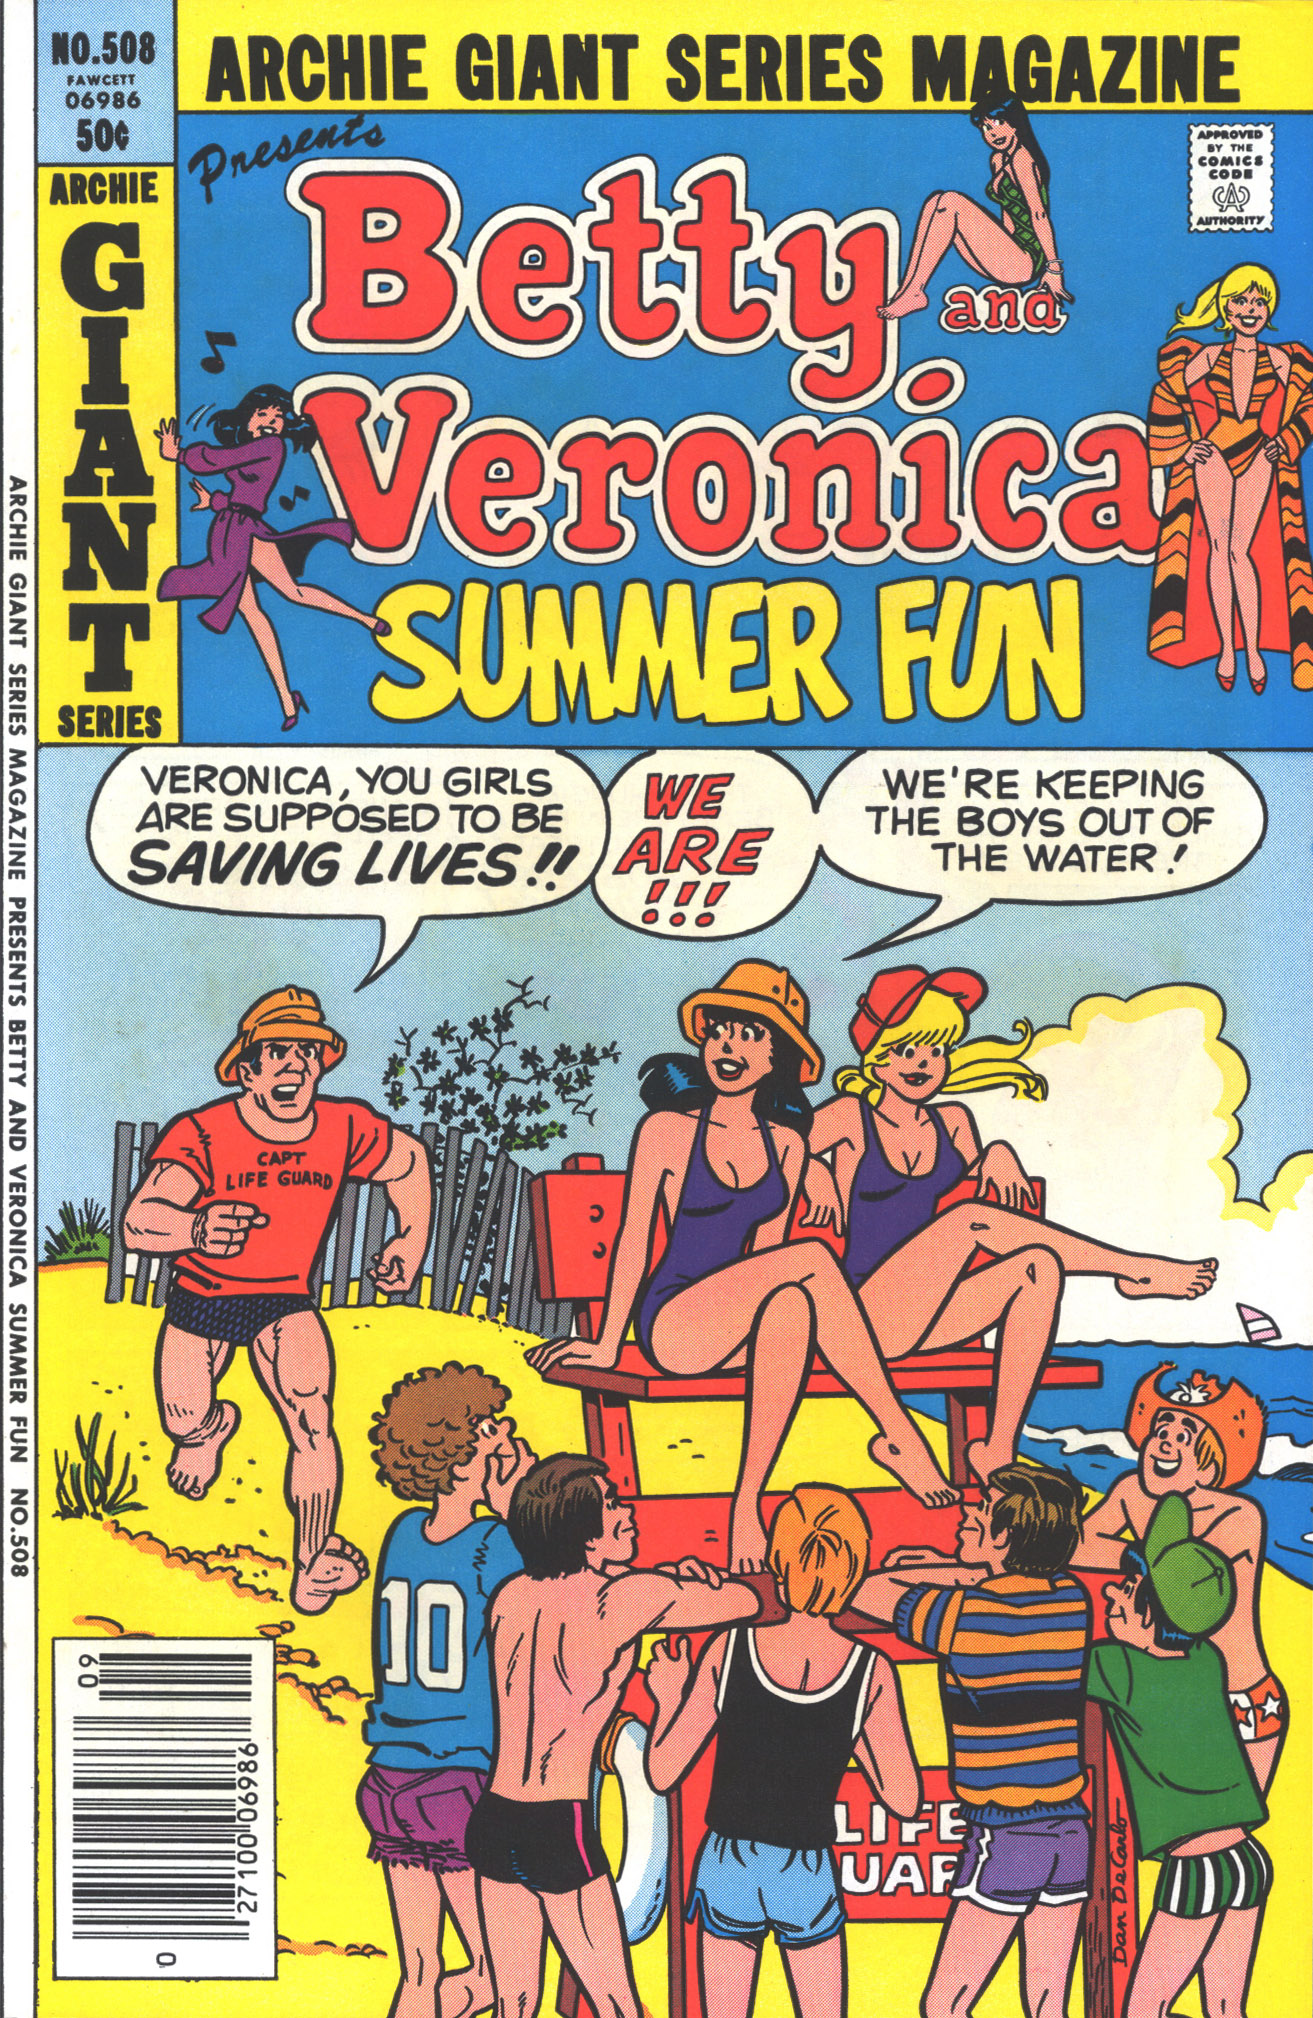 Read online Archie Giant Series Magazine comic -  Issue #508 - 1